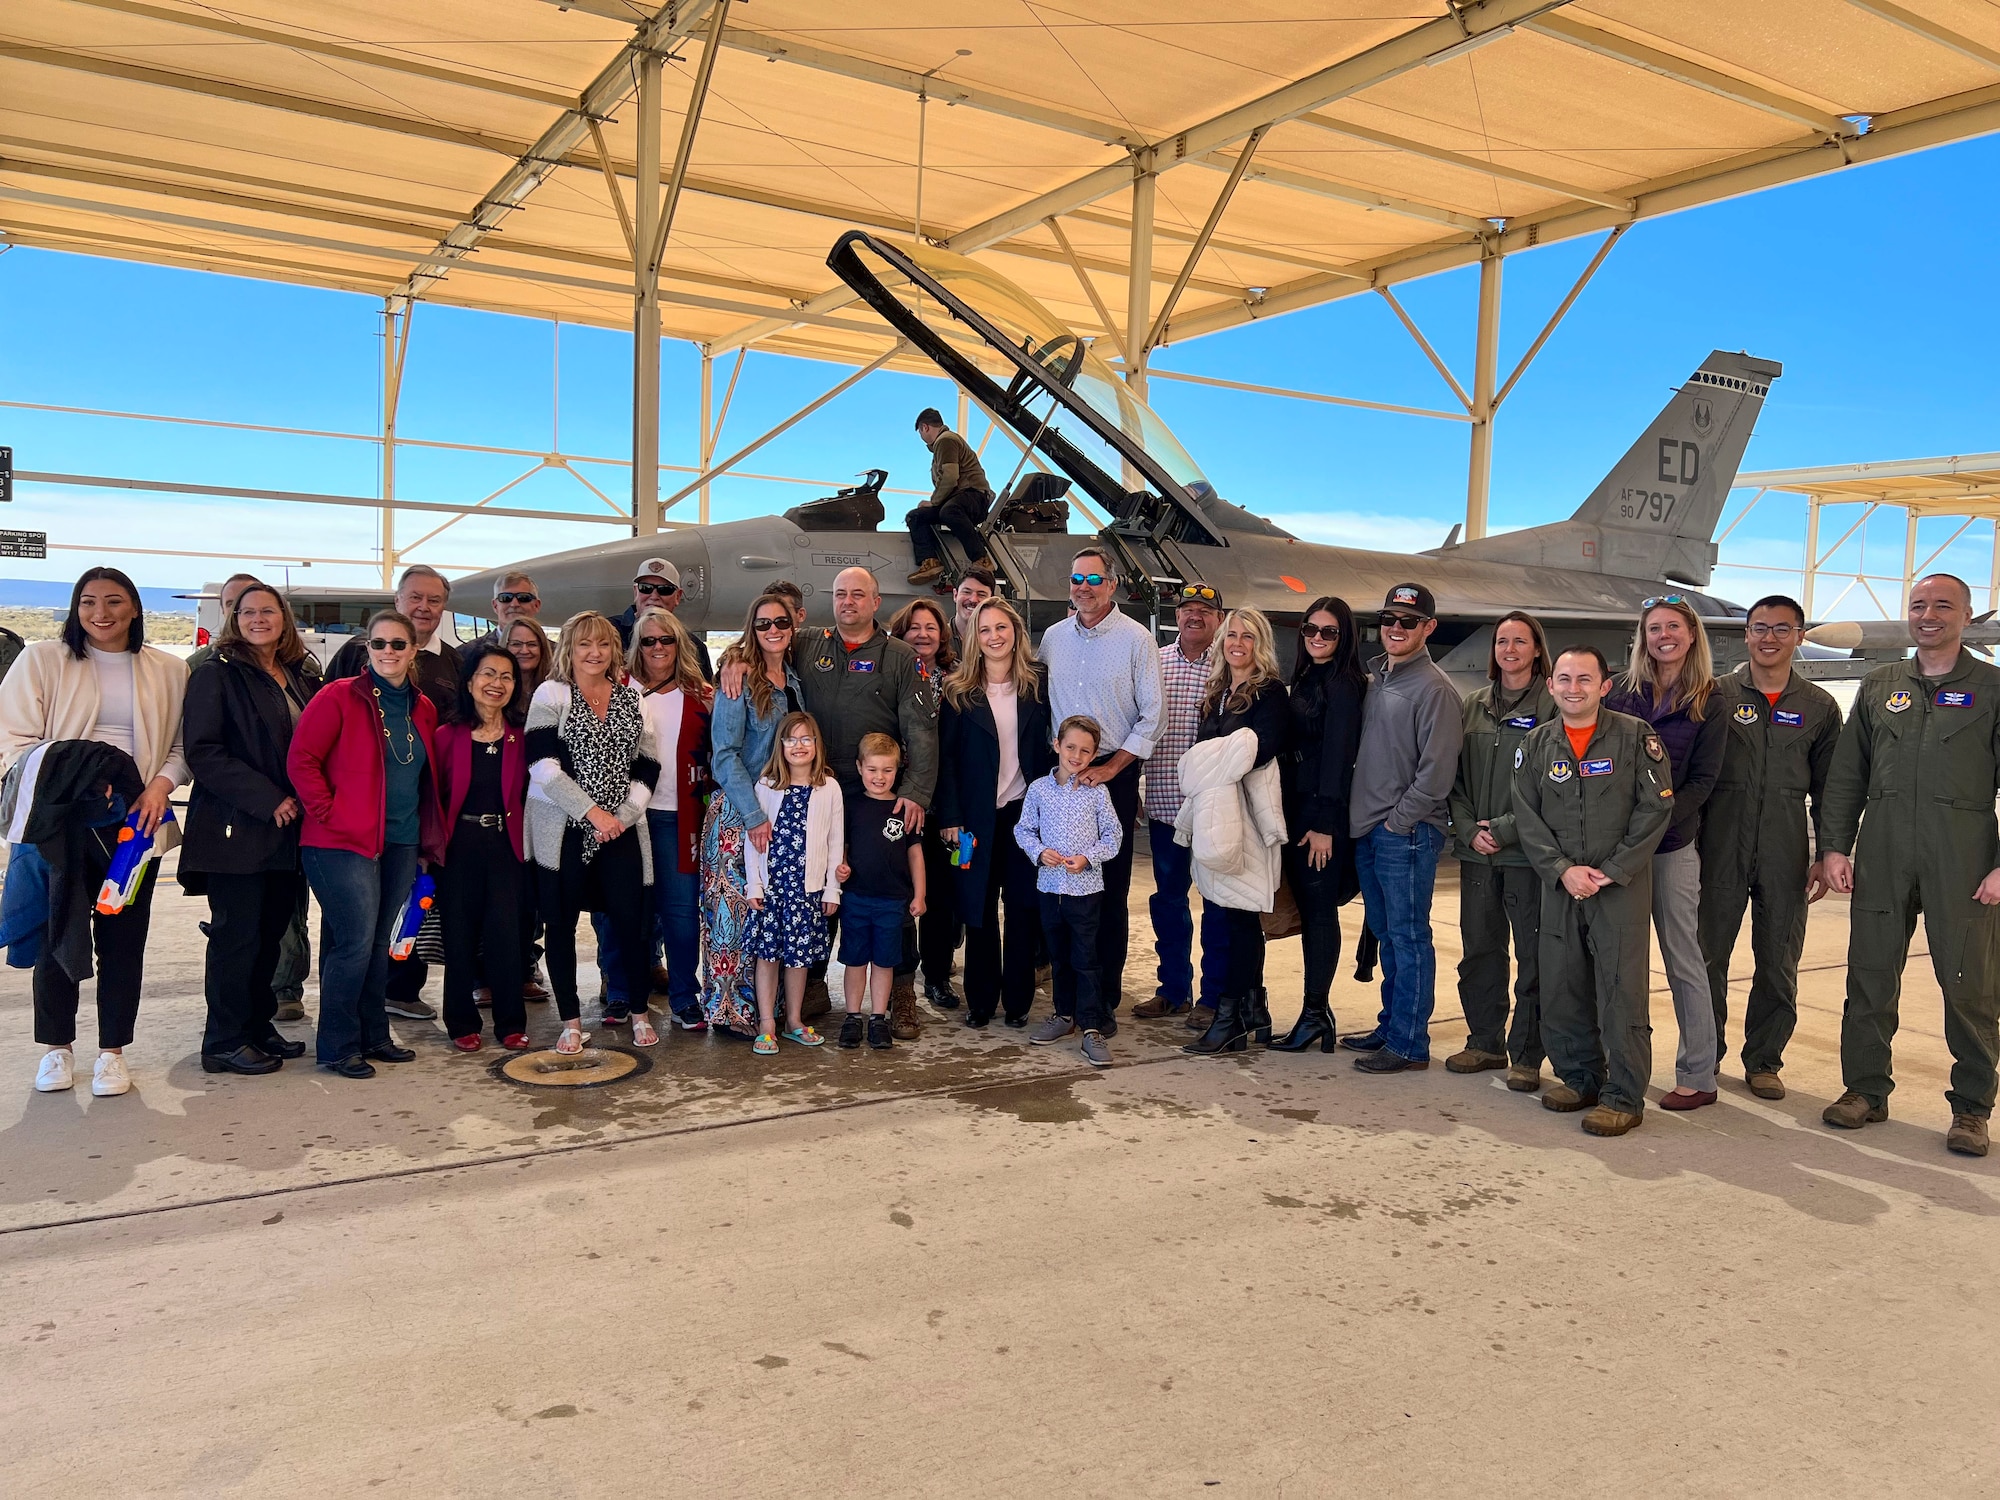 Lt. Col. Matthew Taranto, Chief Aerospace Physiologist, U.S. Air Force Test Pilot School takes a picture with his family and friends after conducting his "fini-flight" before retirement March 31st. (Photo courtesy of Staff Sgt. Elizabeth Taranto)